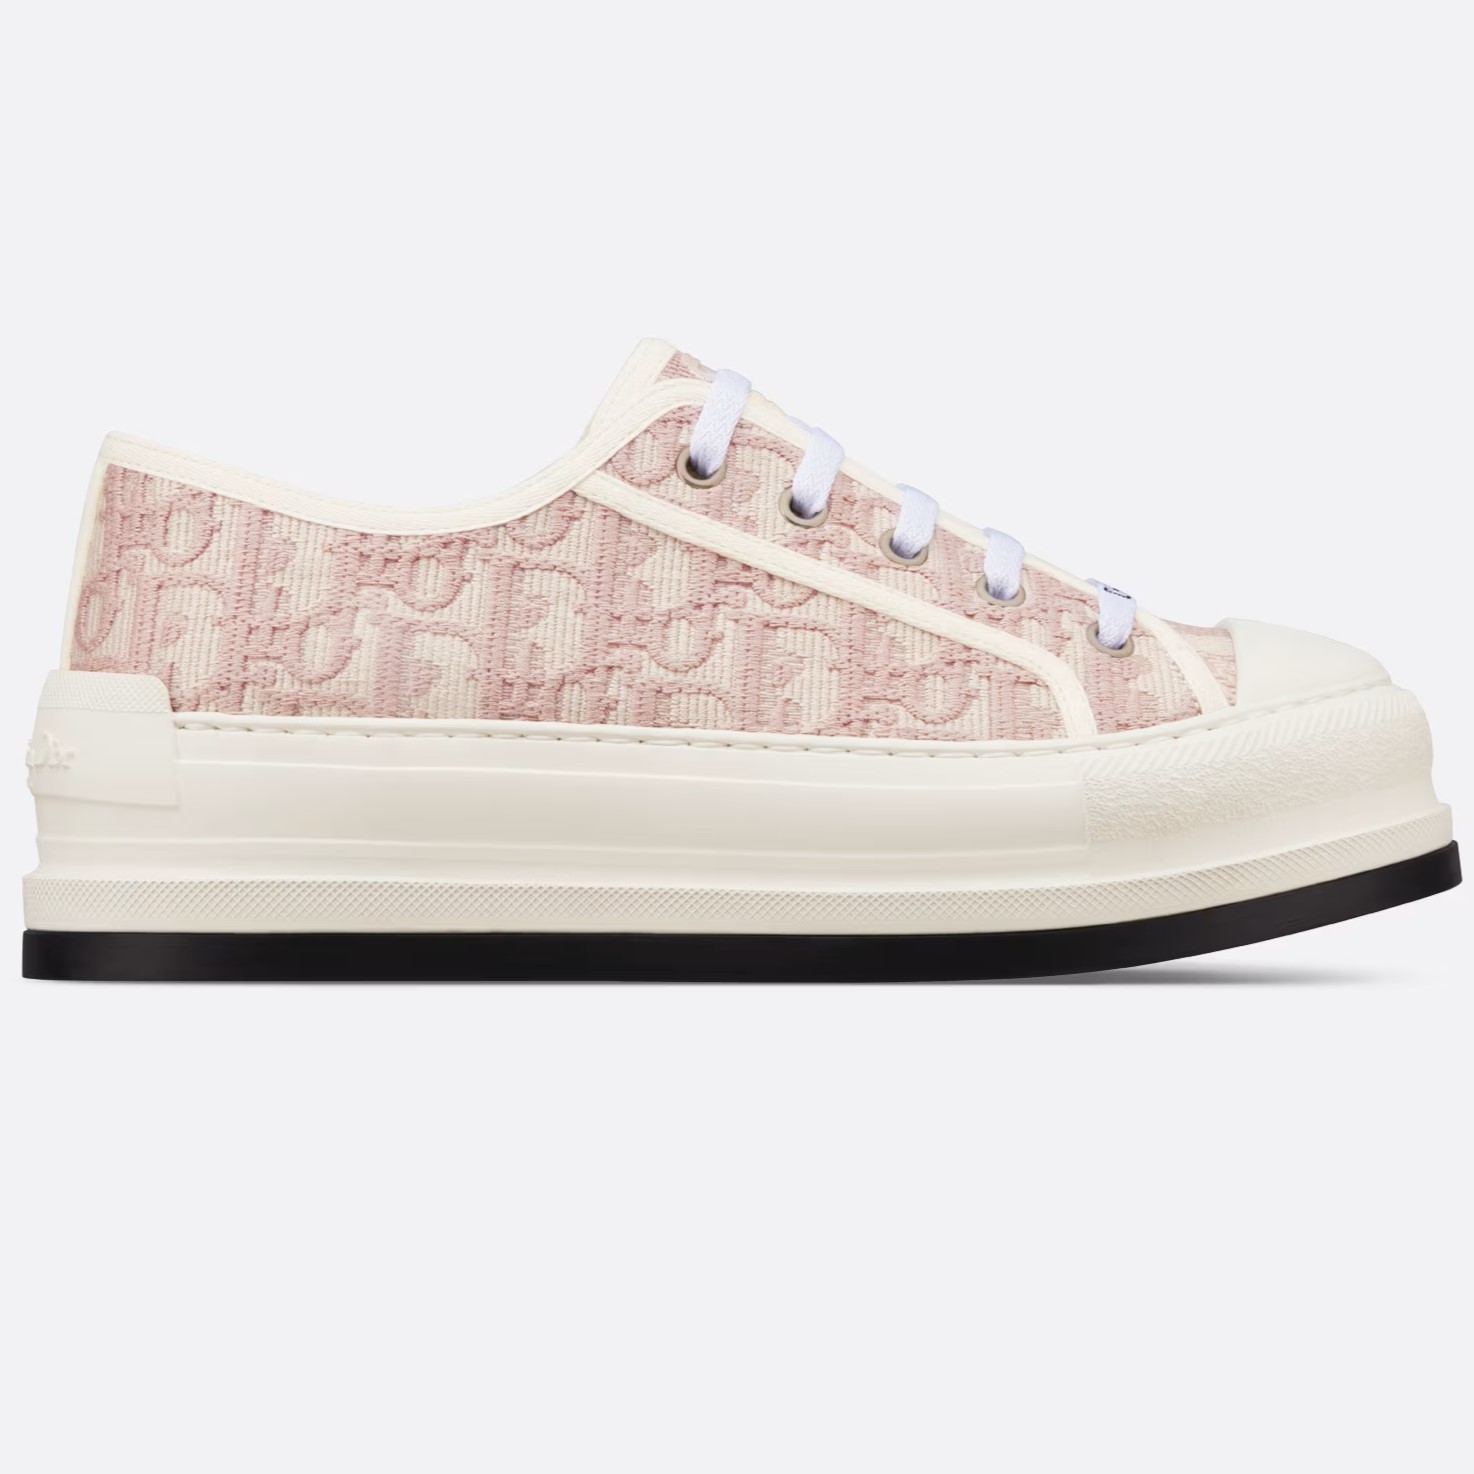 GIÀY THỂ THAO NỮ WALK N DIOR PLATFORM SNEAKER IN NUDE DIOR OBLIQUE EMBROIDERED COTTON 4